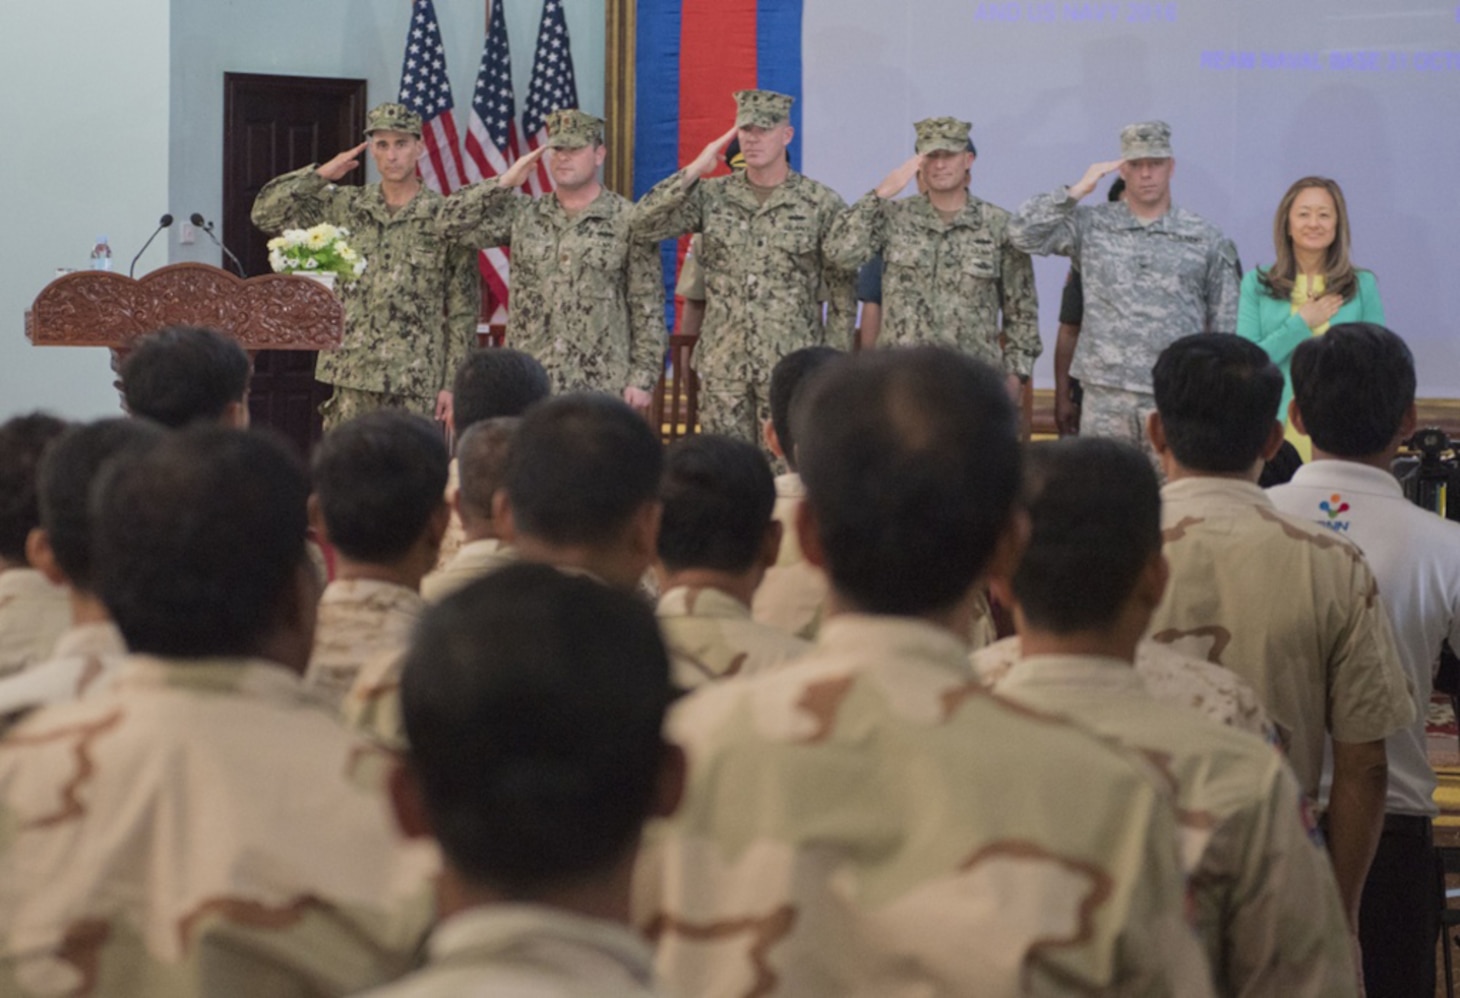 The official party render salutes during the playing of the national anthems during the opening ceremony of Cooperation Afloat Readiness and Training (CARAT) Cambodia 2016. CARAT is a series of annual maritime exercises between the U.S. Navy, U.S. Marine Corps and the armed forces of nine partner nations to include Bangladesh, Brunei, Cambodia, Indonesia, Malaysia, the Philippines, Singapore, Thailand, and Timor-Leste.